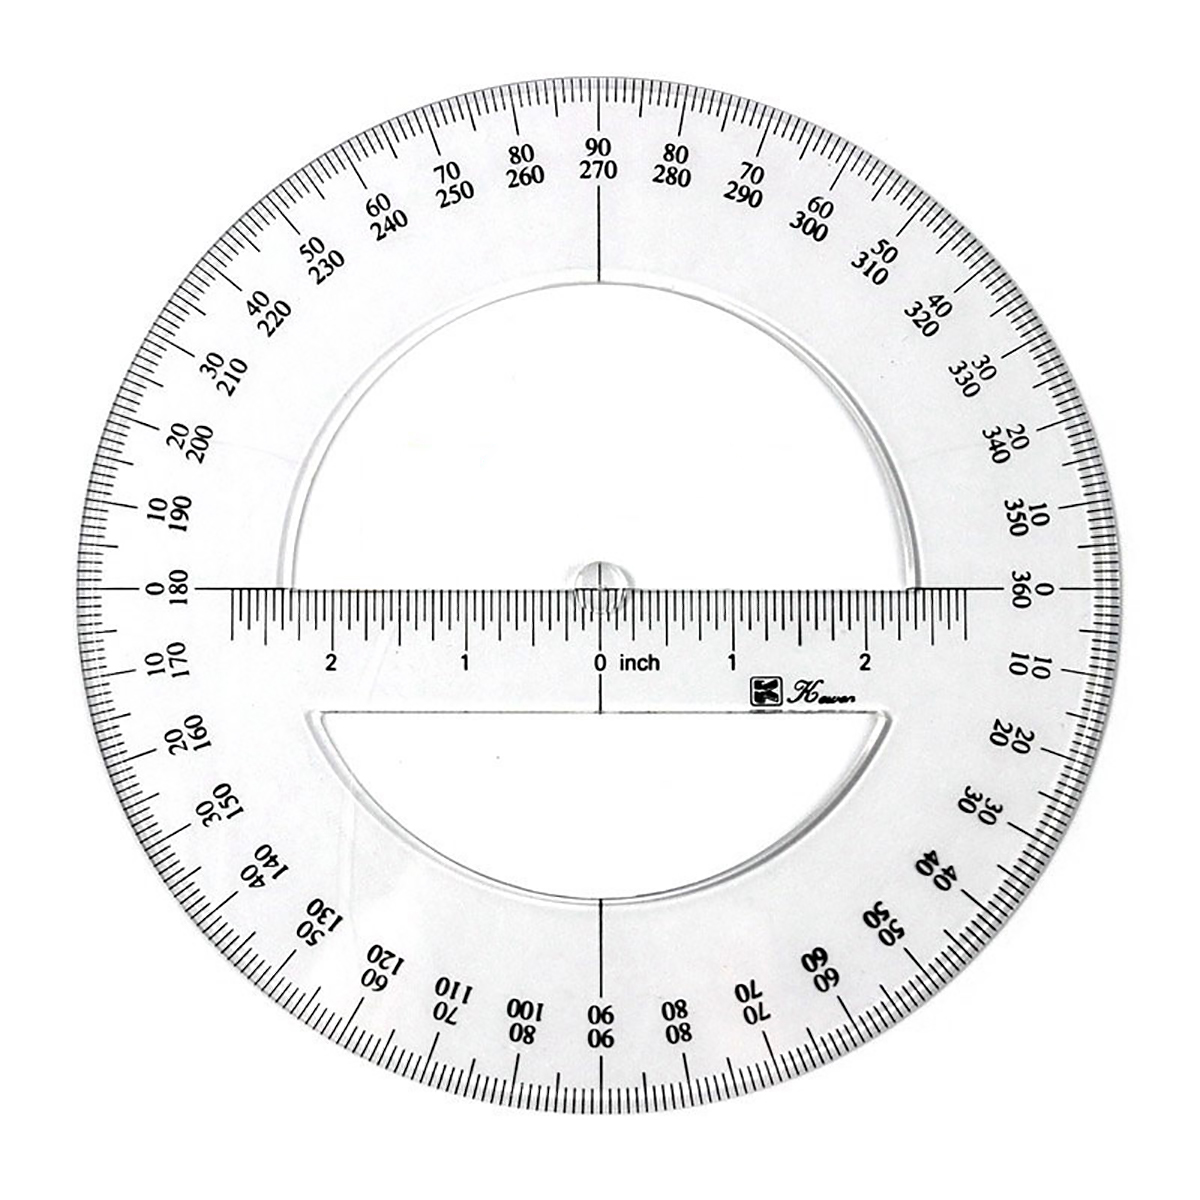 BE-TOOL 360 Degree Protractor Ruler Circle Measuring Tool for Drawing Measure Engineering Plastic - image 1 of 6